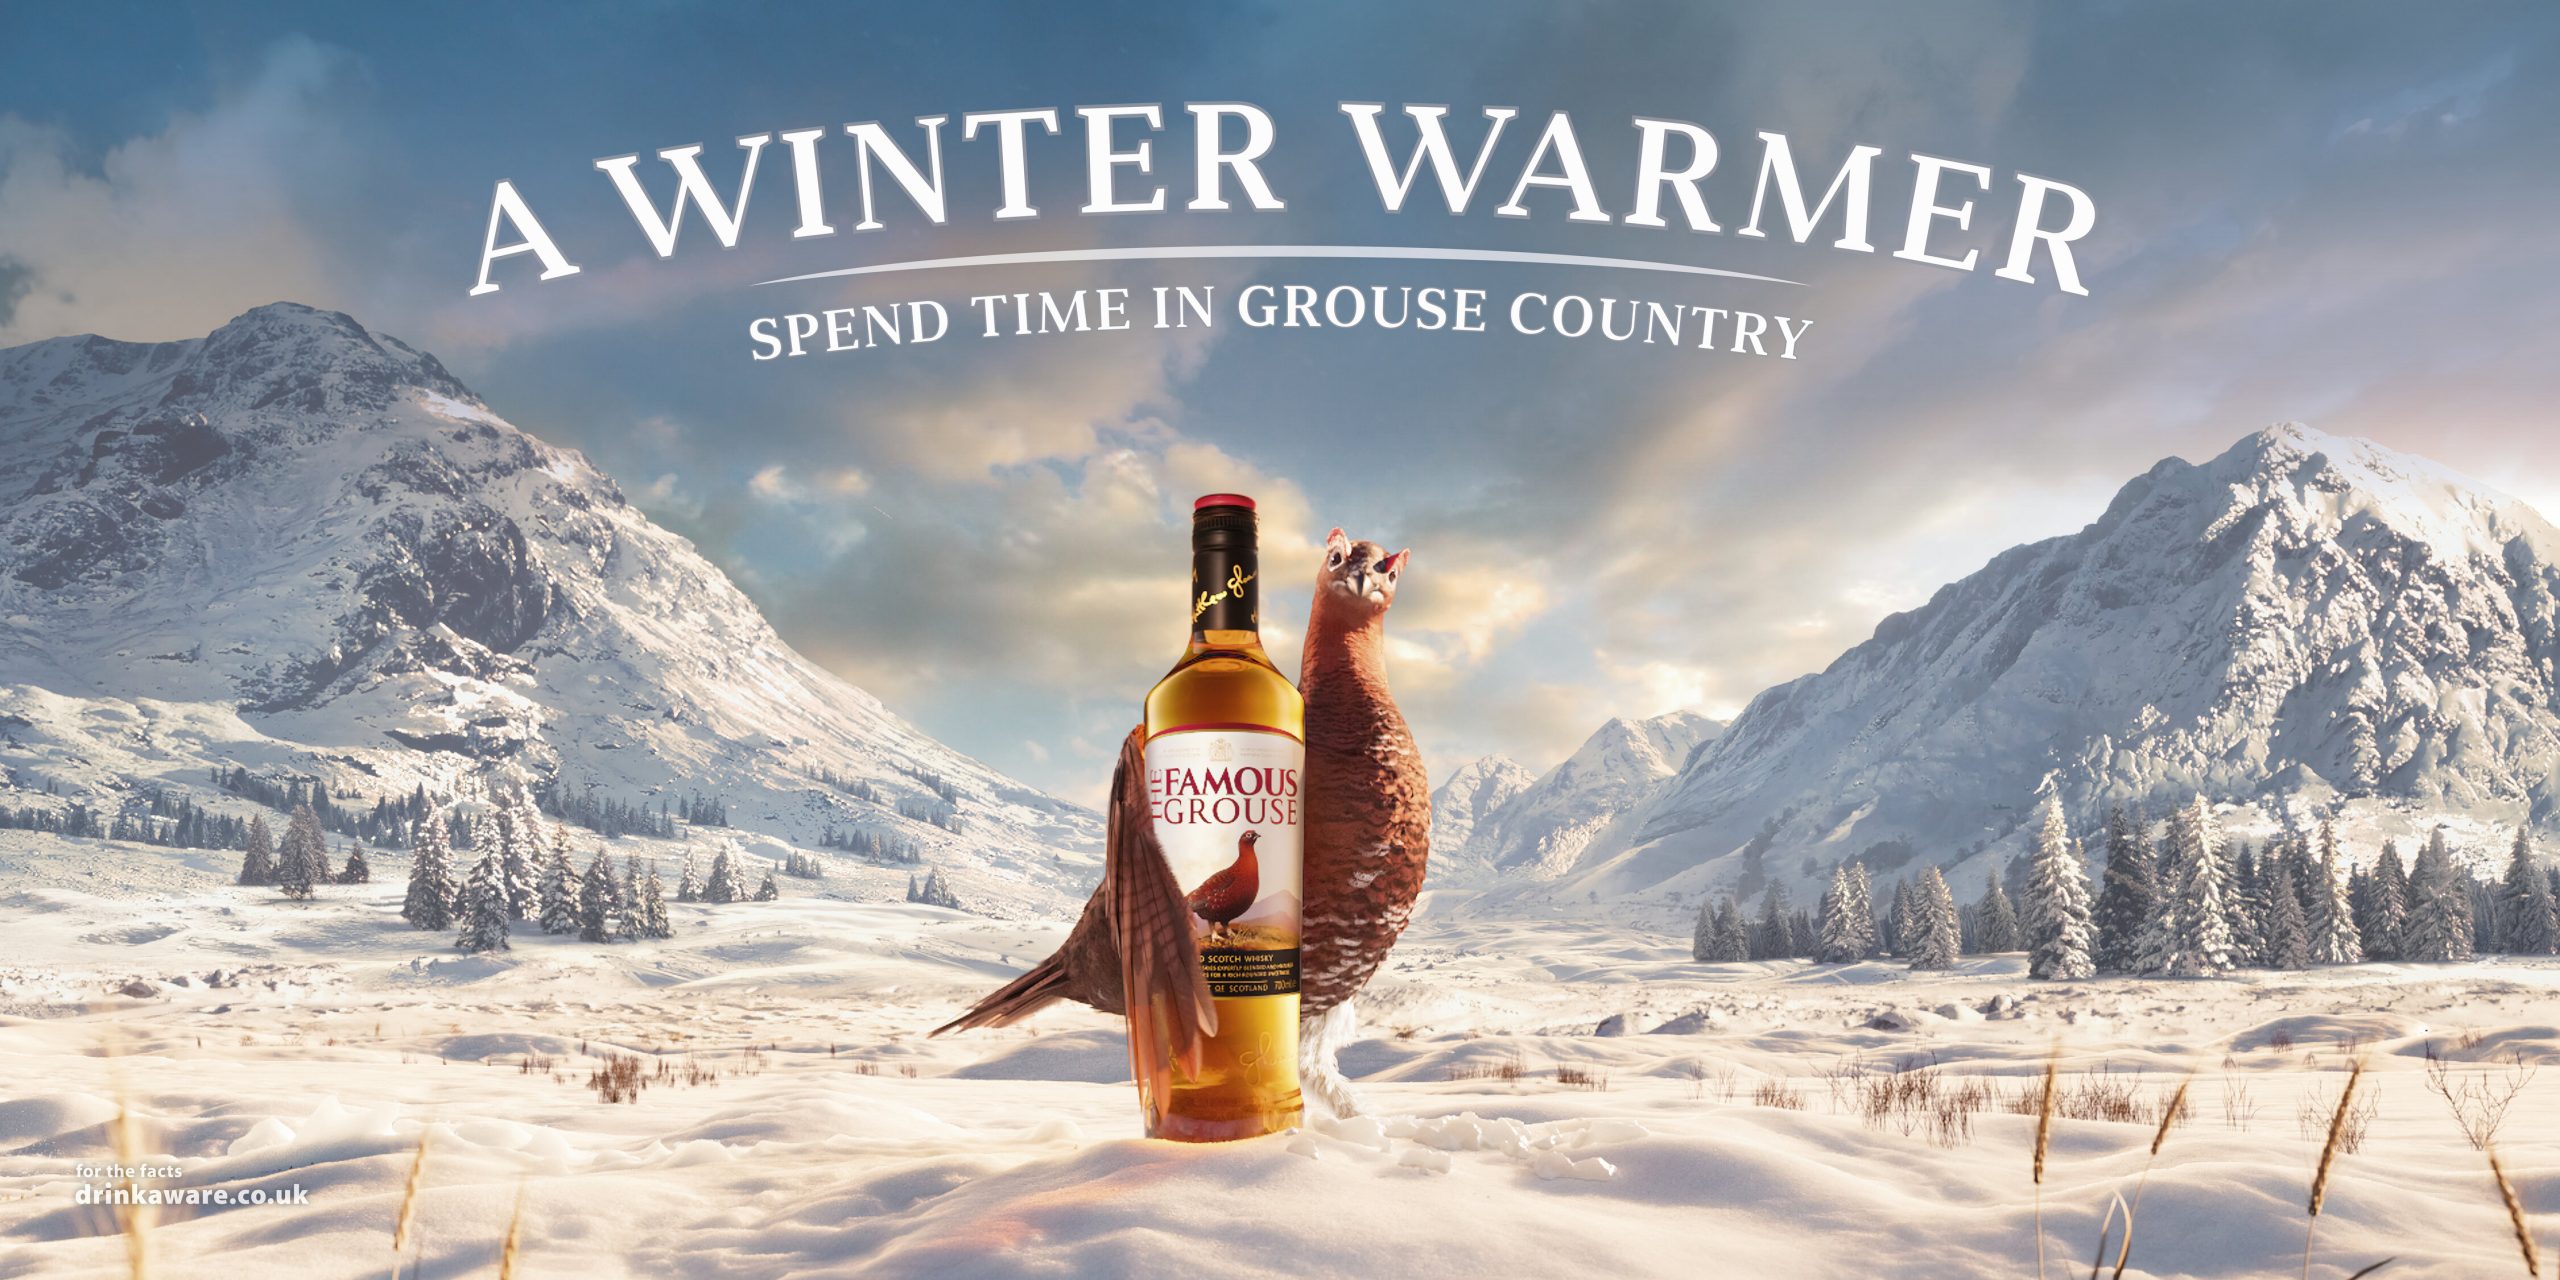 The Famous Grouse Campaign - A winter warmer - Spend Time In Grouse Country